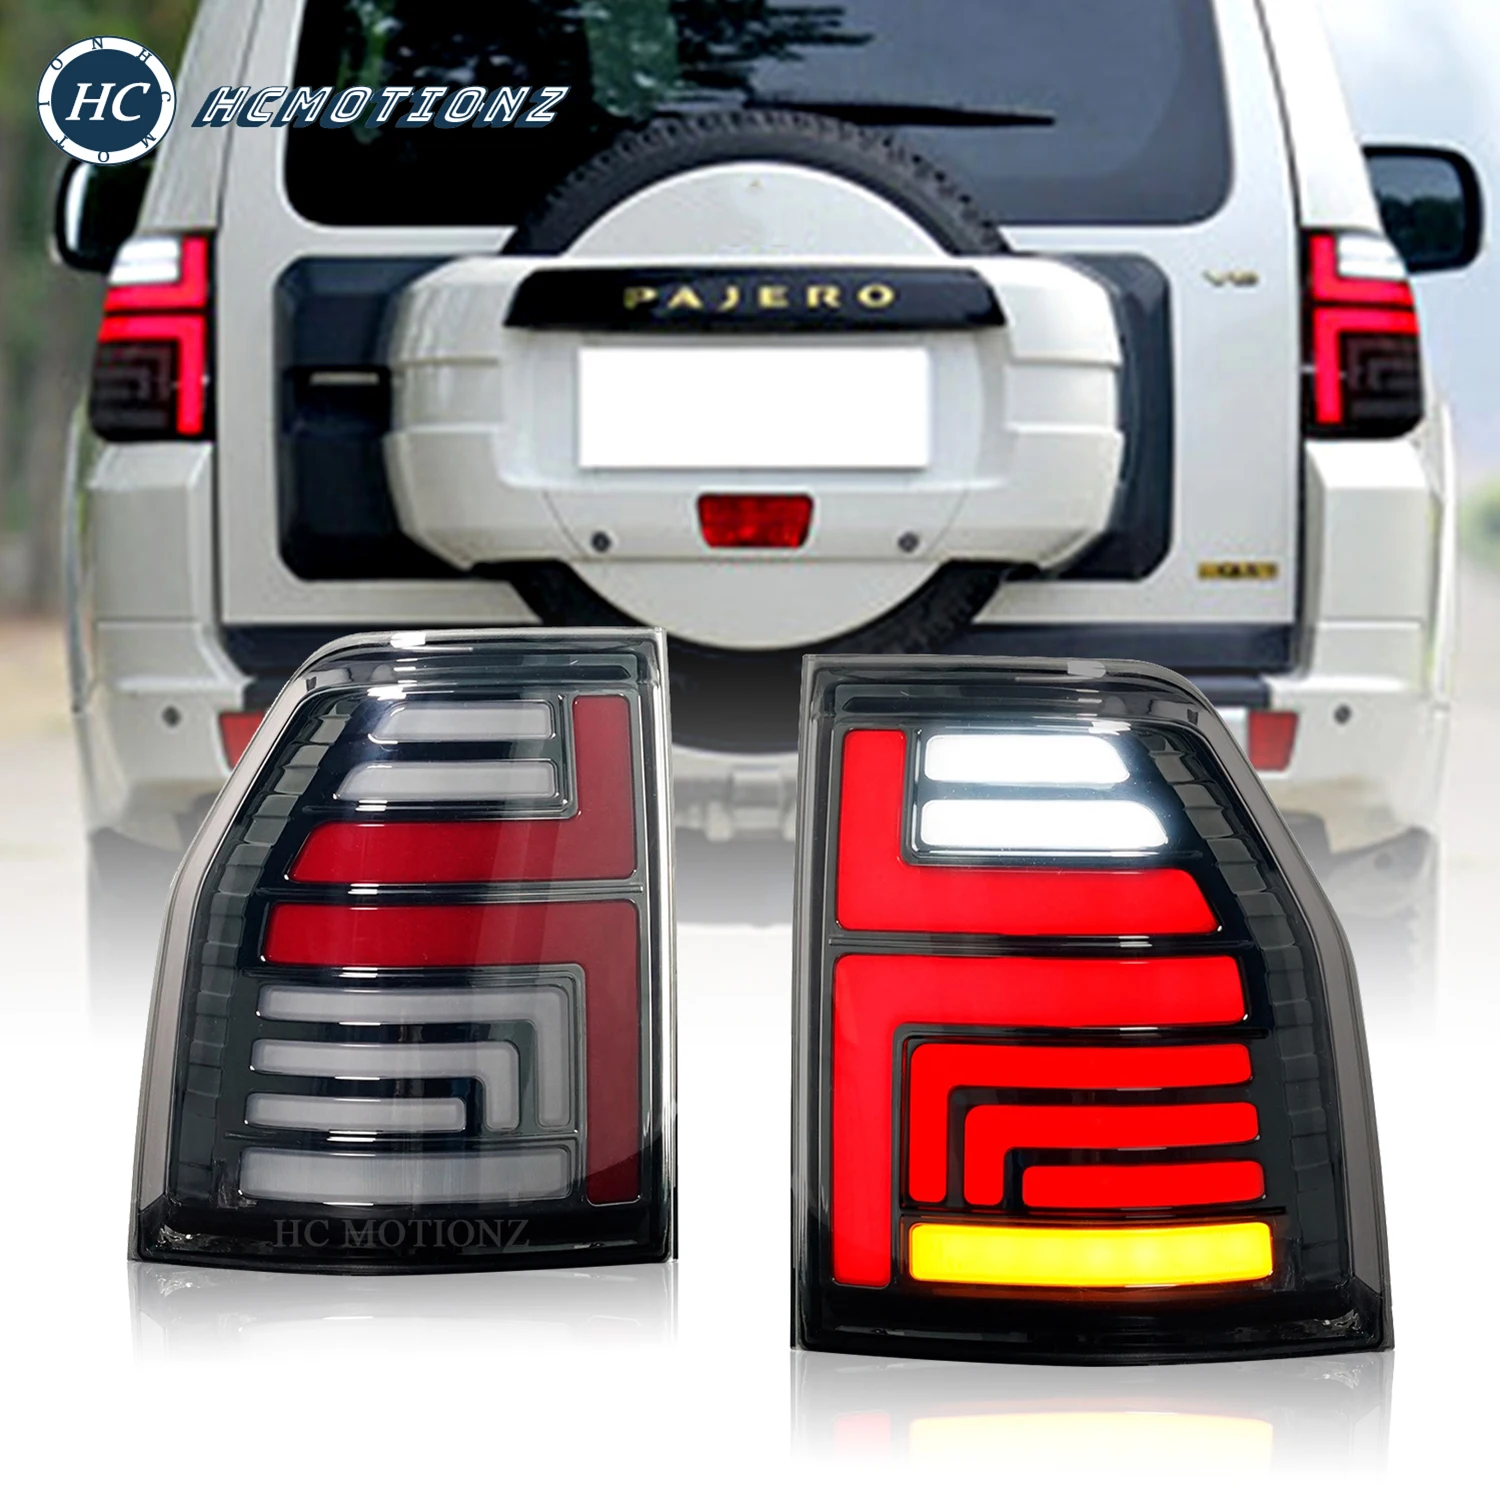 

HCMOTIONZ LED Tail Lights Assembly for Mitsubishi Pajero 2006-2021 Shogun Montero V80 Car Back Lights Accessories Rear Lamps